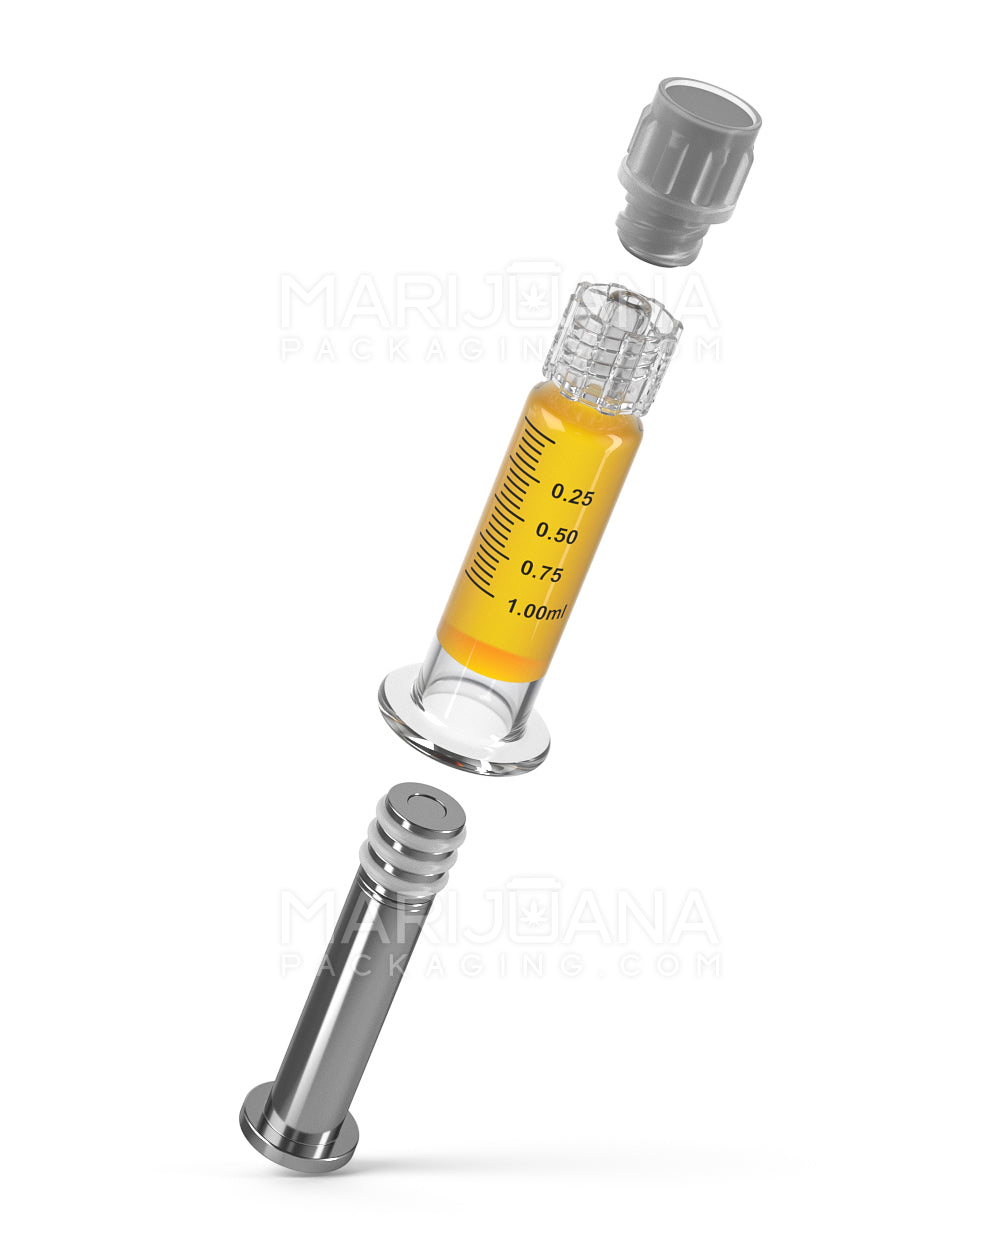 Luer Lock | Glass Dab Applicator Syringes w/ Metal Plunger | 1mL - 0.25mL Increments | Sample - 7